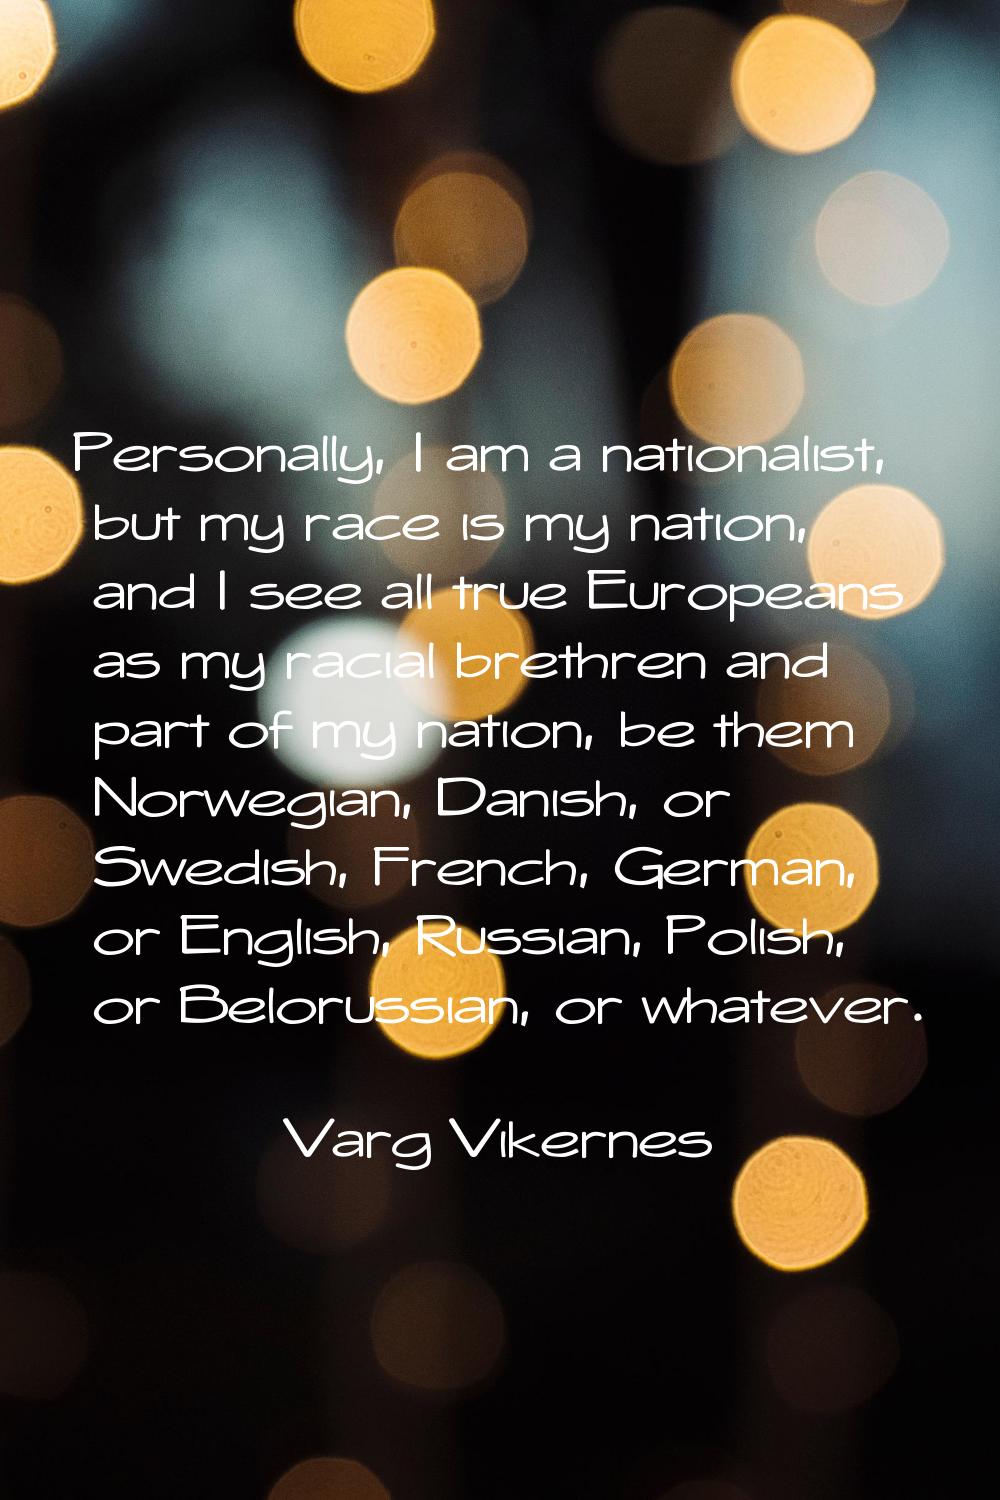 Personally, I am a nationalist, but my race is my nation, and I see all true Europeans as my racial